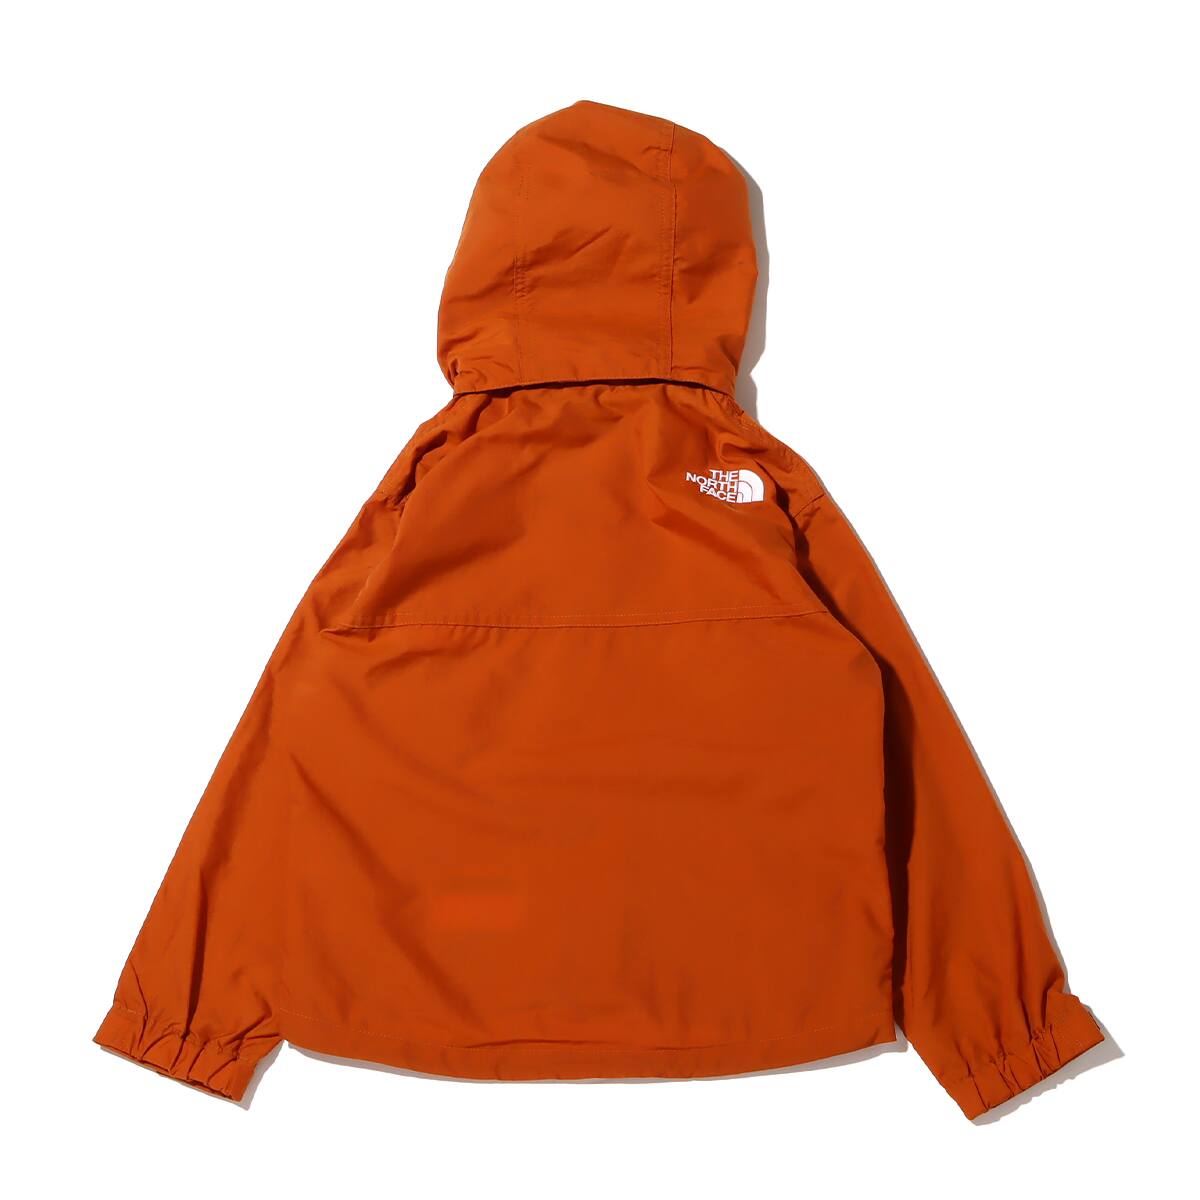 THE NORTH FACE COMPACT JACKET レザーブラウン 22FW-I